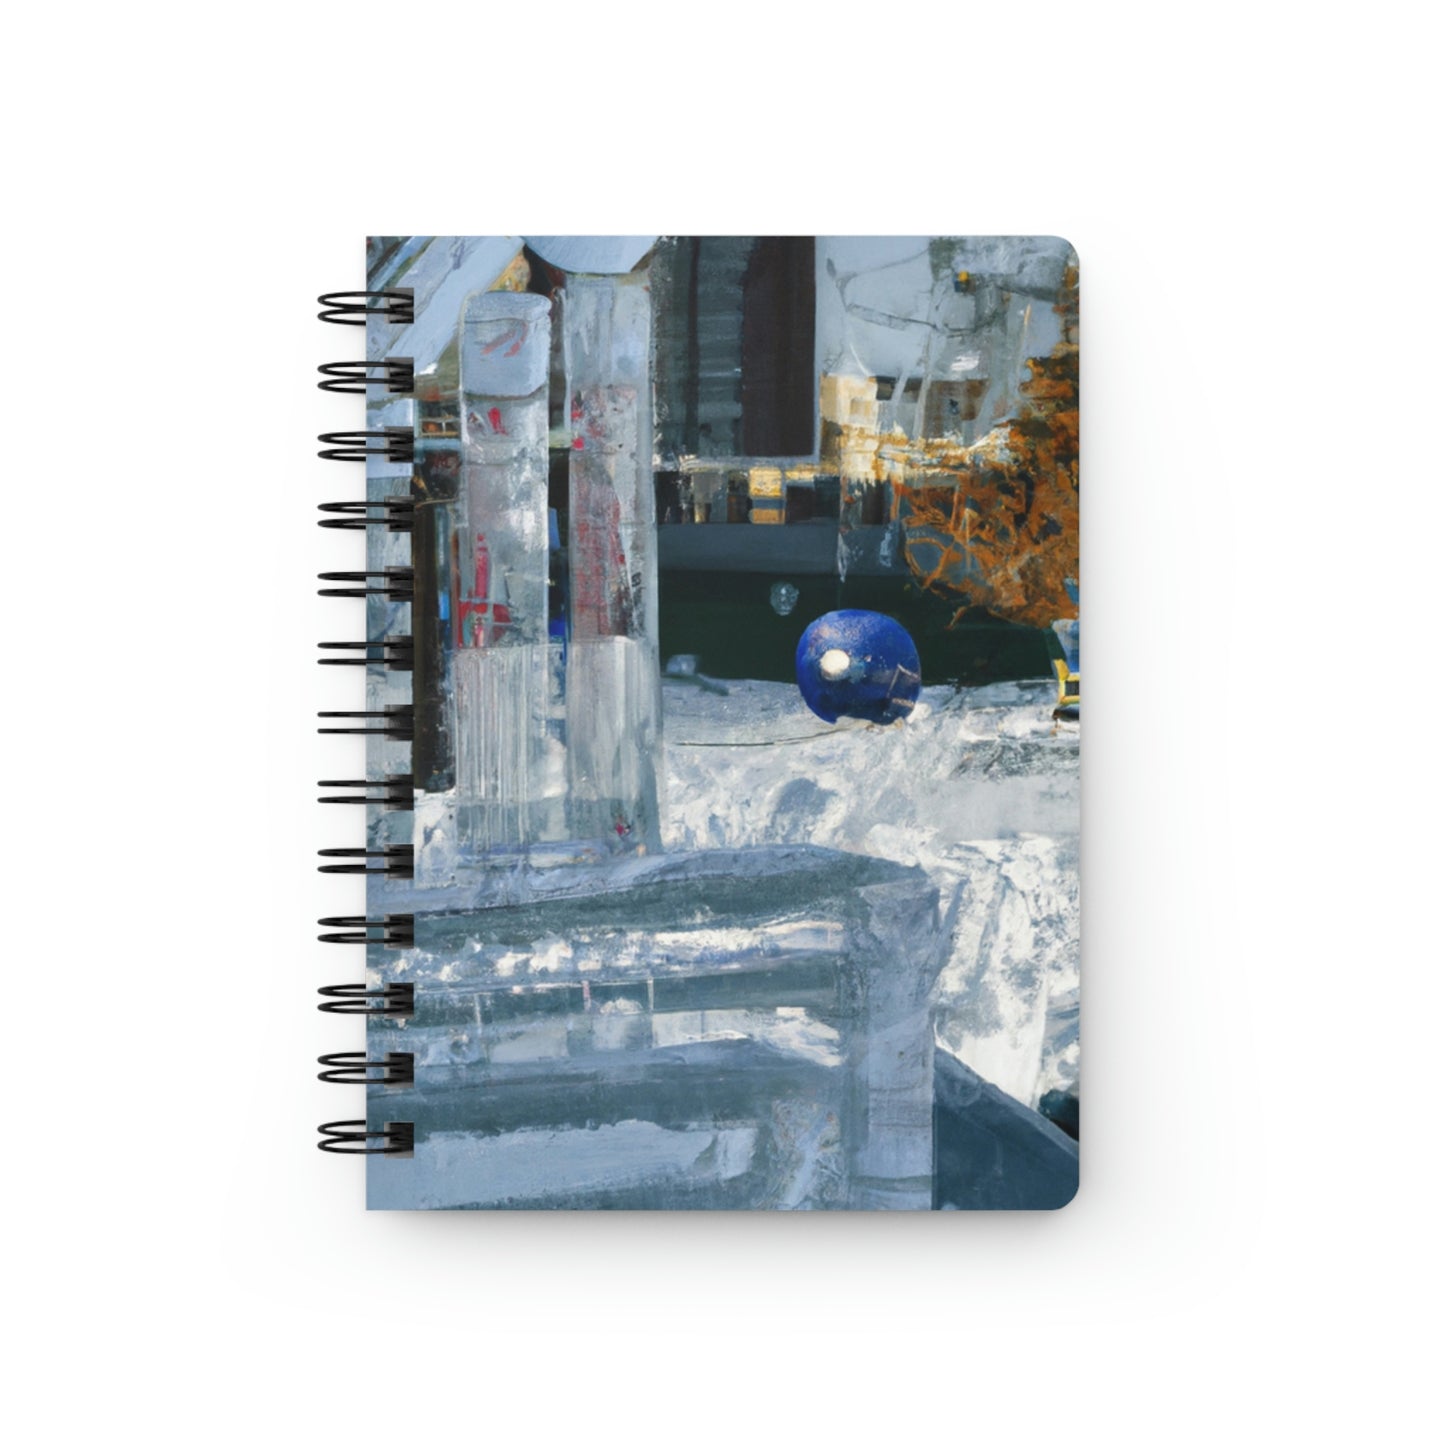 "Frozen Melodies: Crafting Music with Ice" - The Alien Spiral Bound Journal